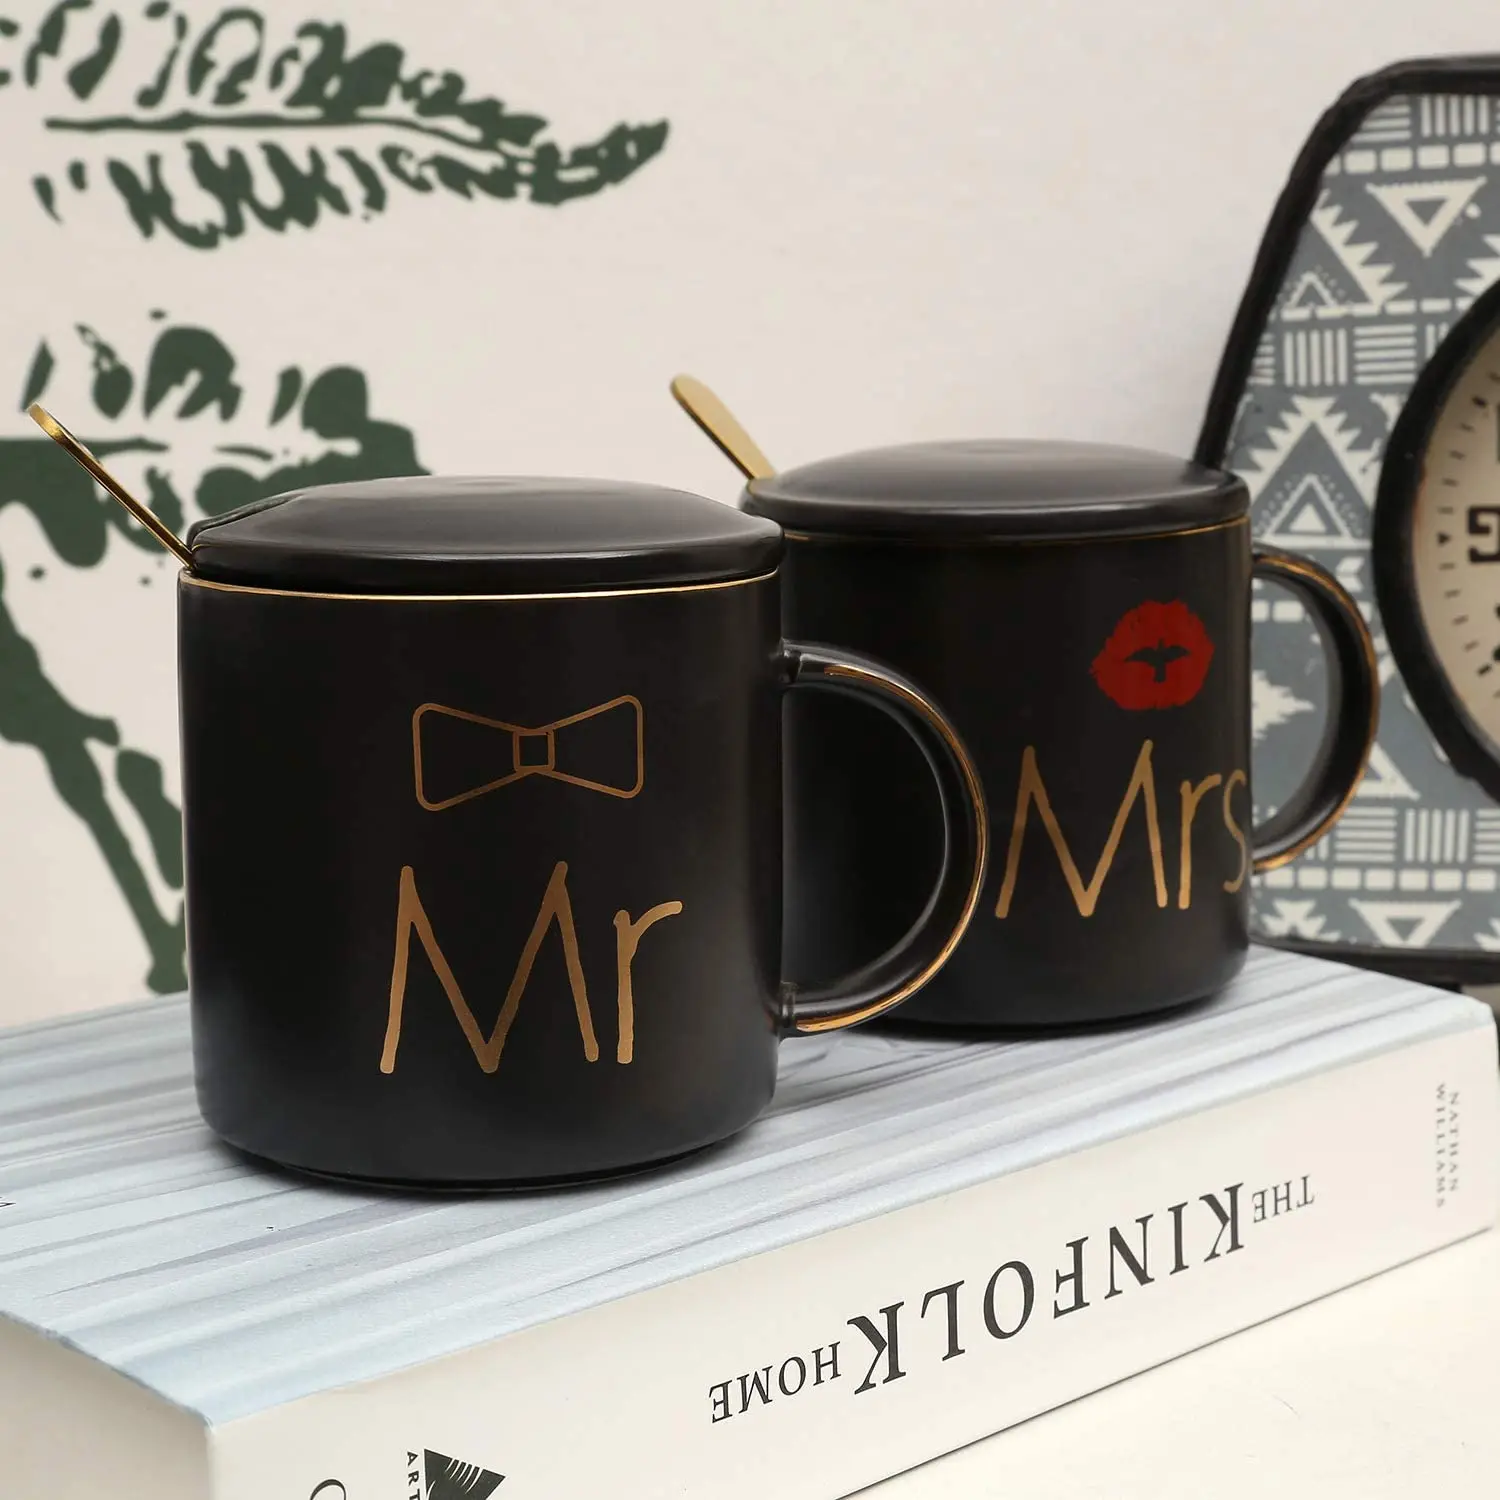 https://ae01.alicdn.com/kf/S2e7d00bd450841aa8bd18a70c84fb767k/Mr-and-Mrs-Coffee-Mugs-Creative-Couples-Black-Ceramic-Cups-Wedding-Gifts-for-Newlyweds-Cup-Set.jpg